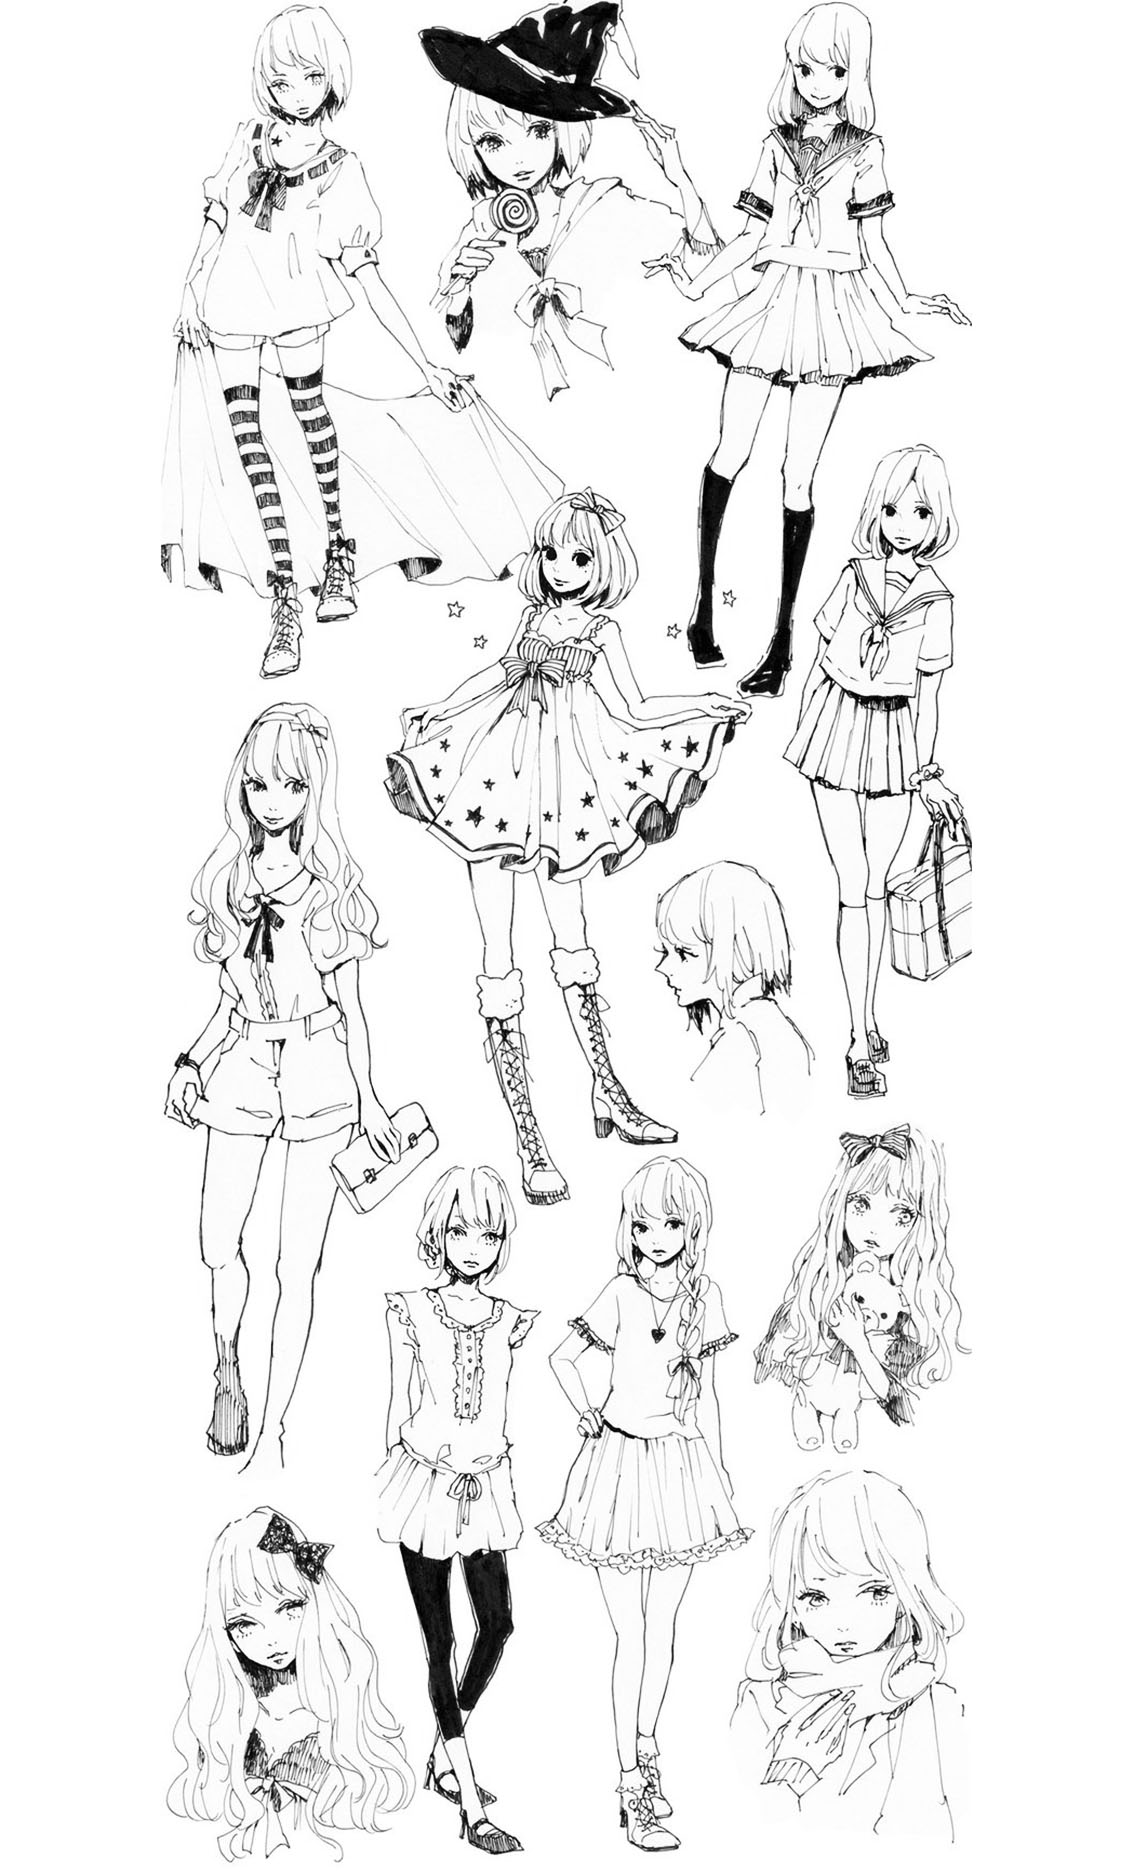 Manga drawing with female characters with various styles of clothes